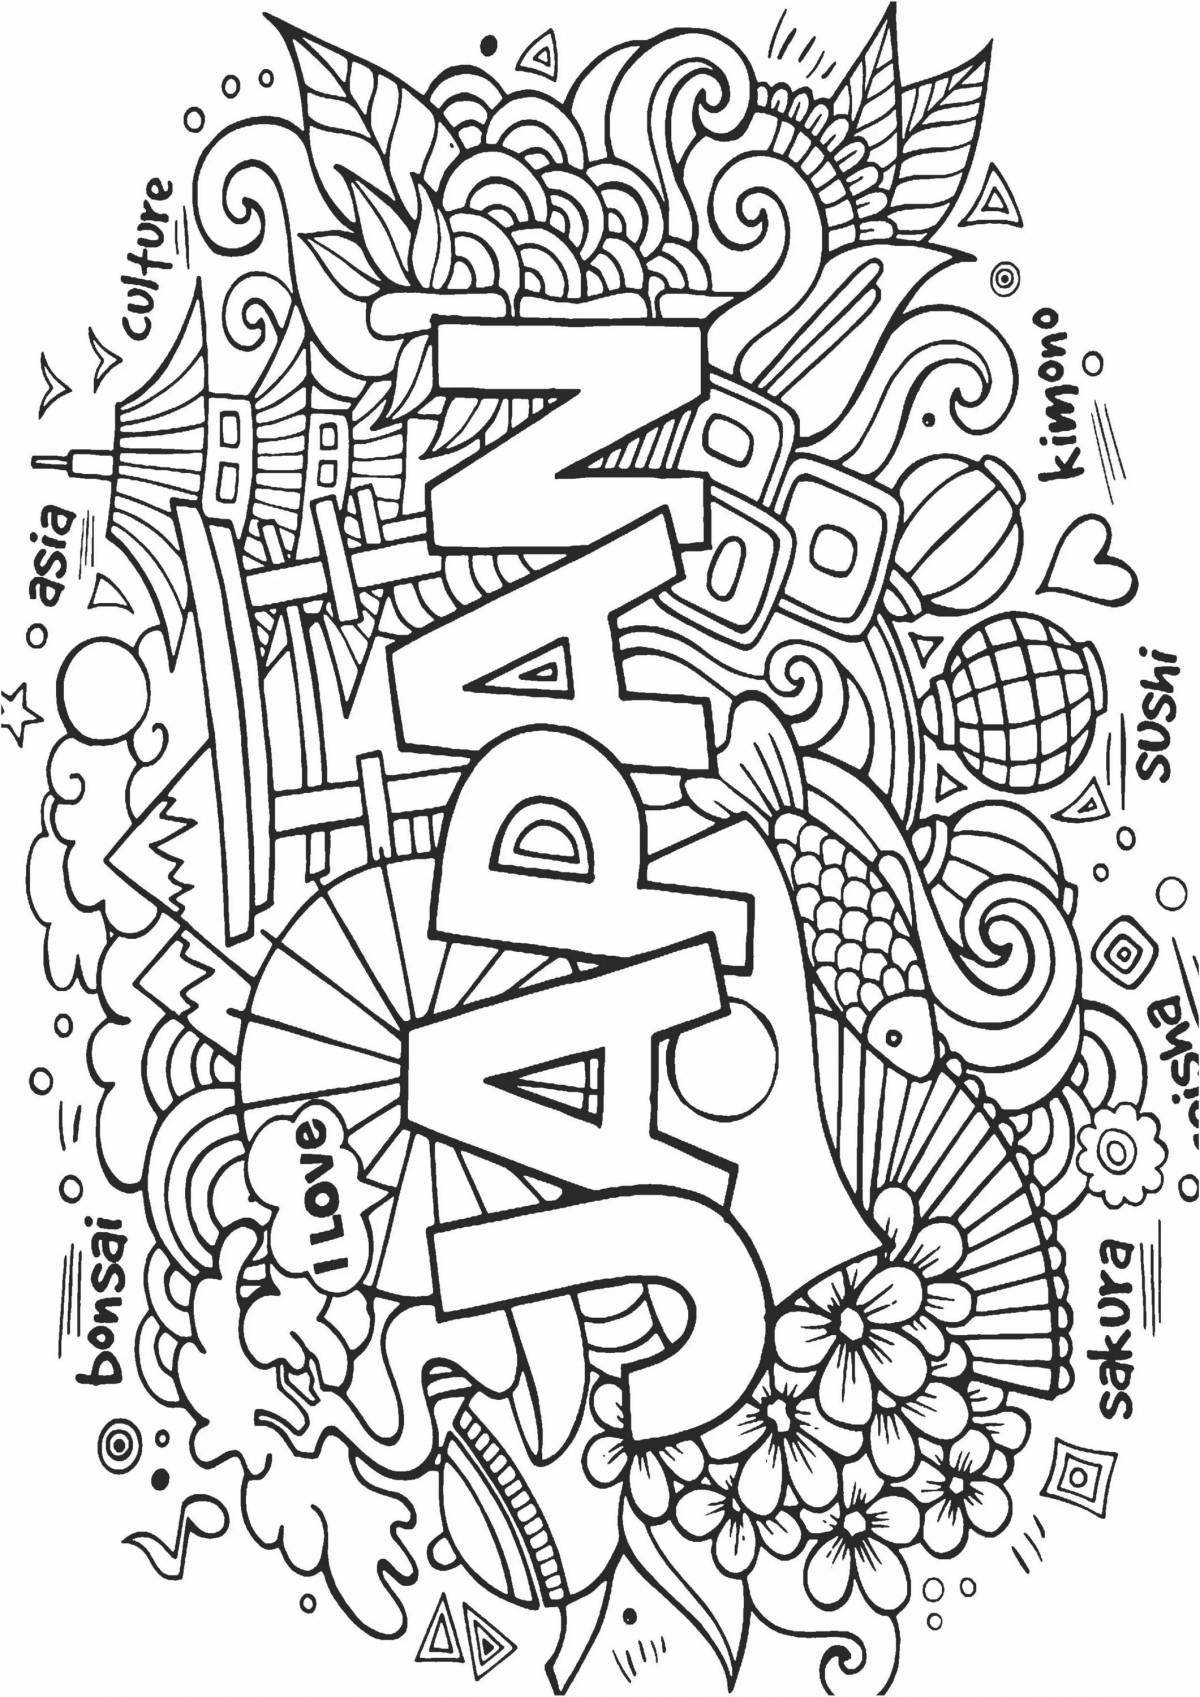 Amazing anti-stress coloring book in country style